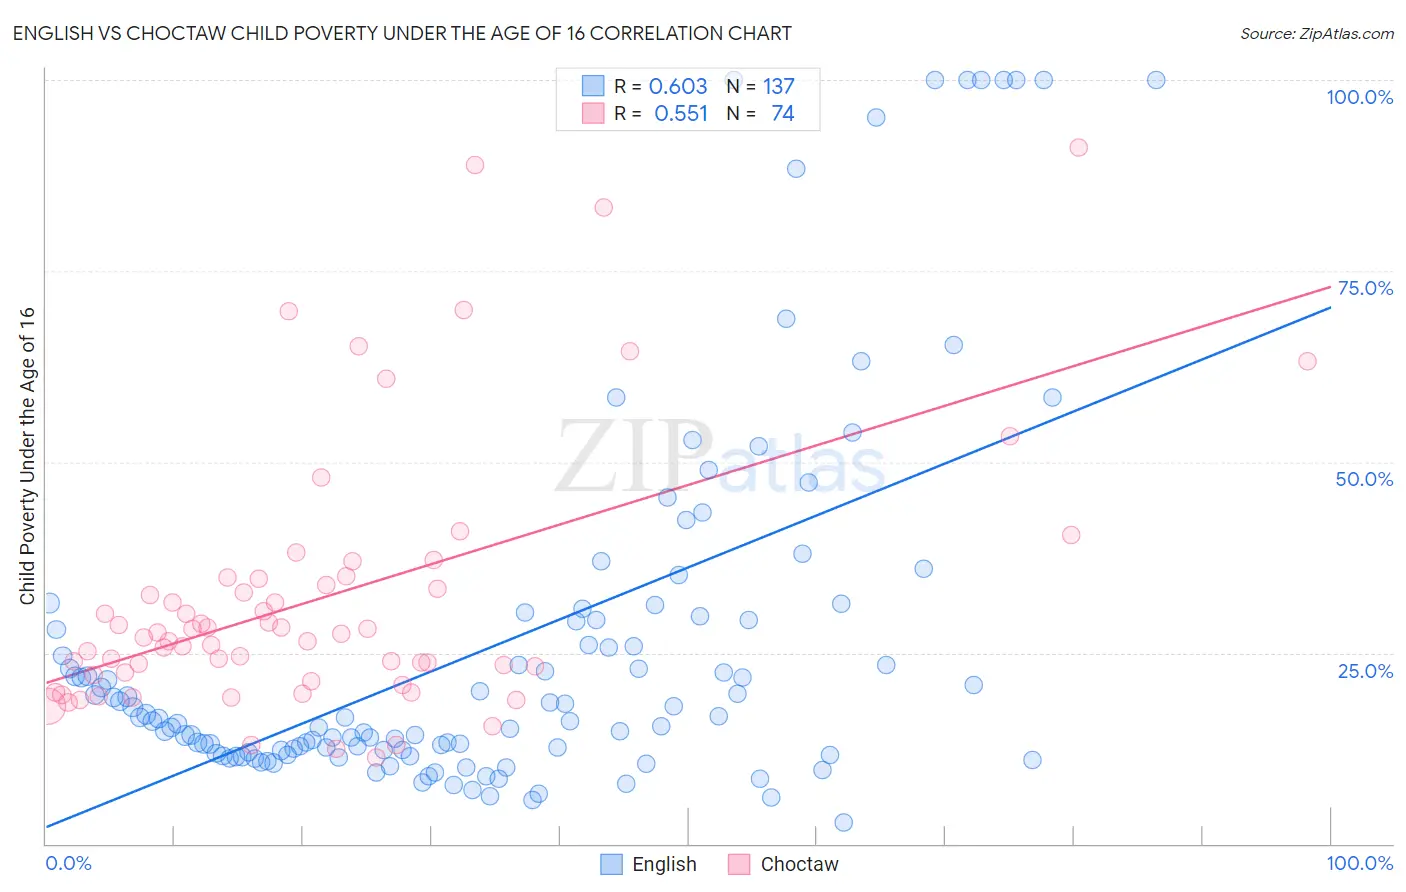 English vs Choctaw Child Poverty Under the Age of 16